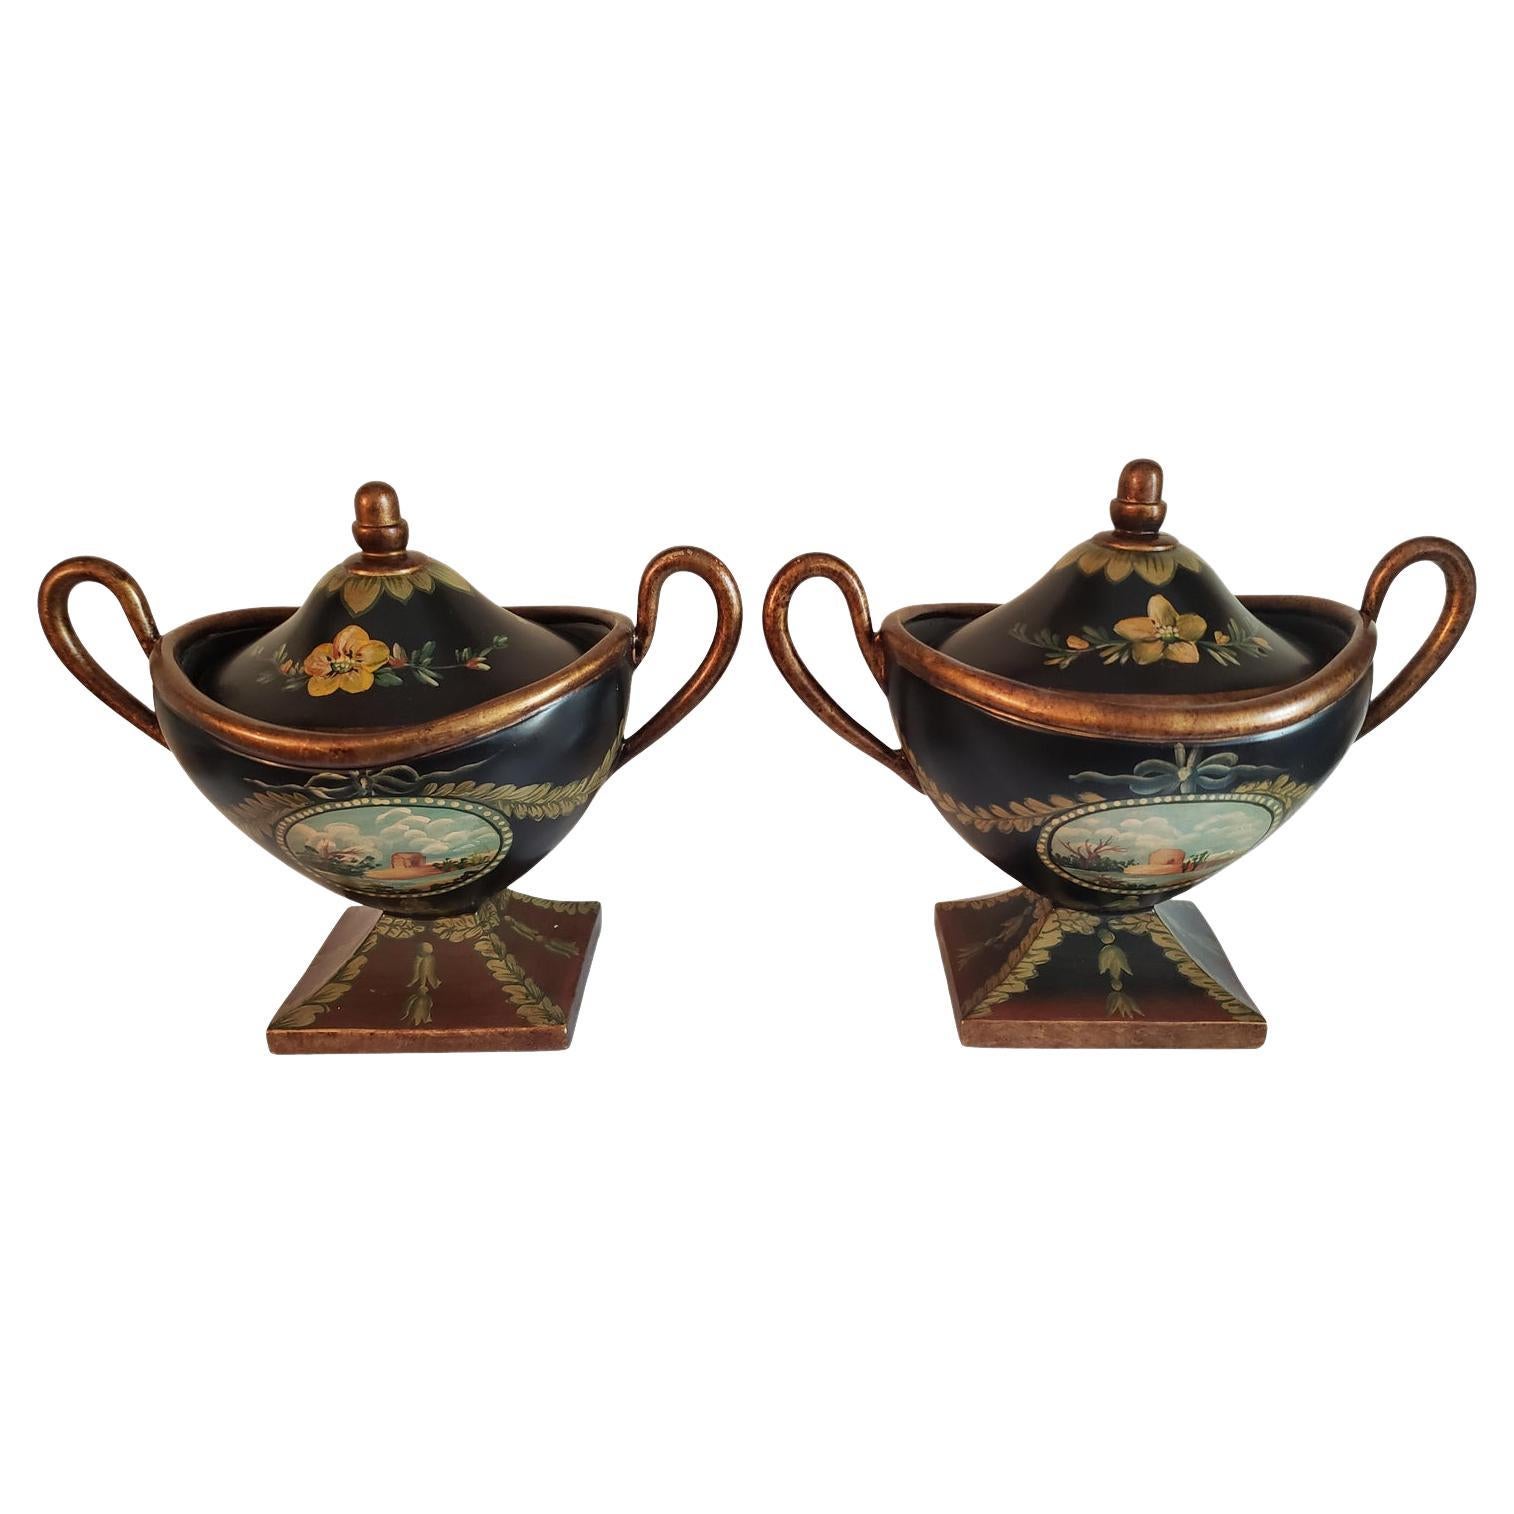 Vintage 1950s Hand Painted Decorative Ceramic Urns, a Pair For Sale